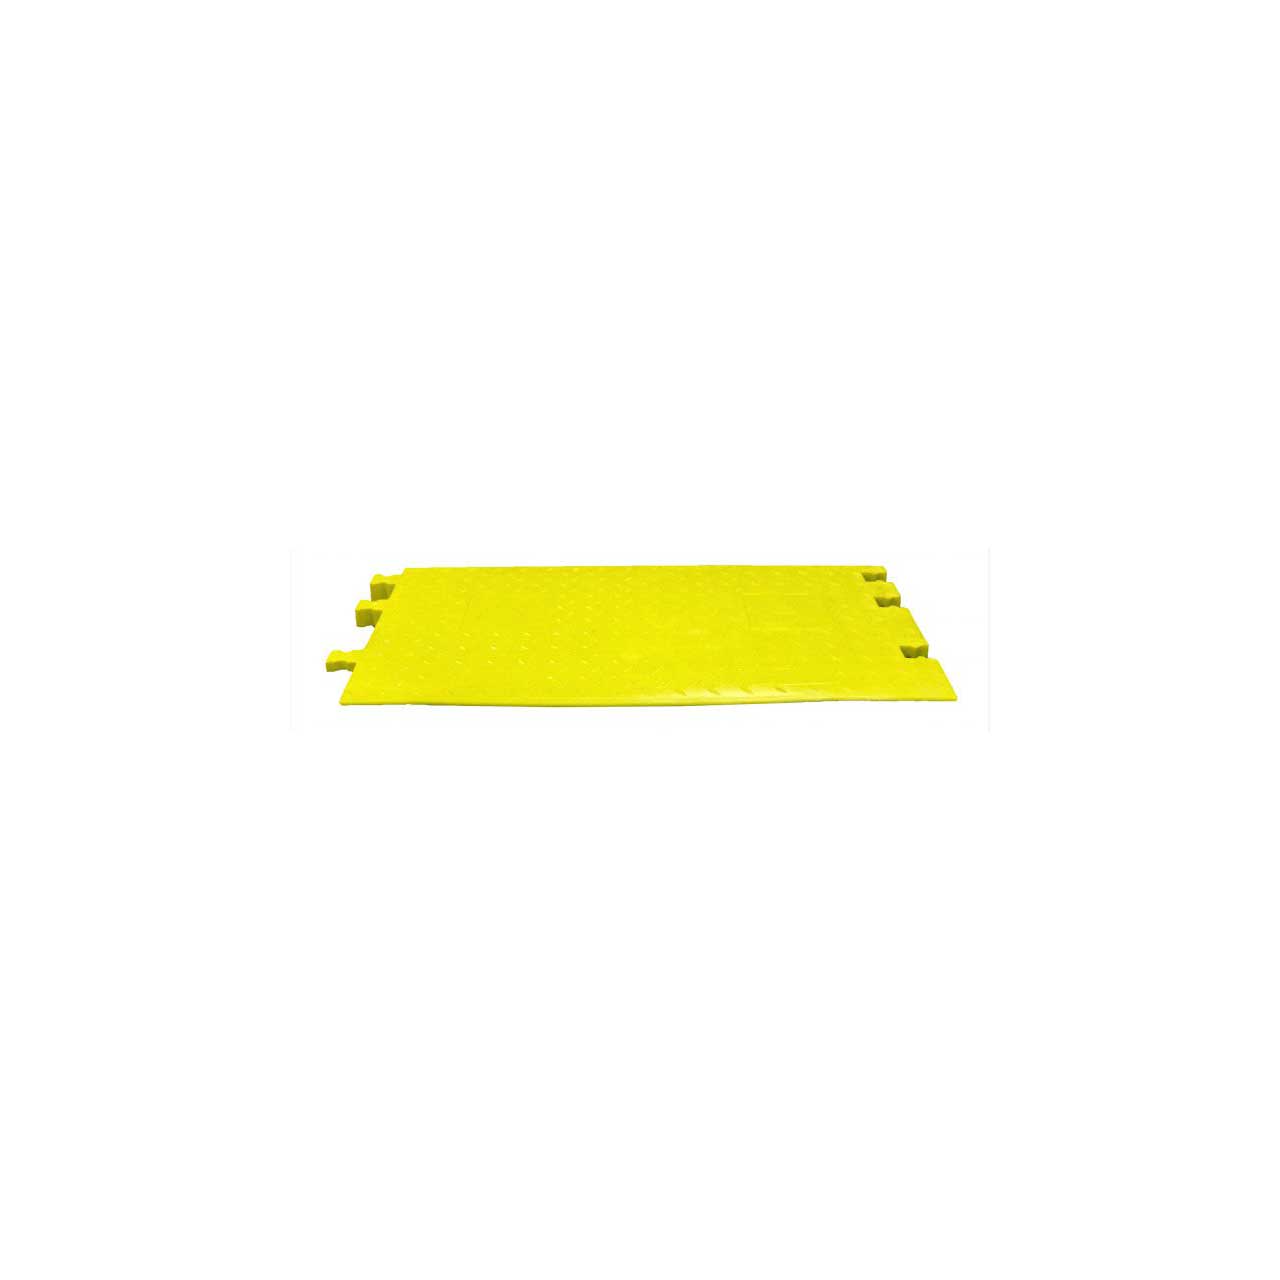 Checkers WSA-125-RFAH-DY Female Ramp for 5-Ch Yellow Jacket Cable Protector AMS Modular Accessibility System - Yellow